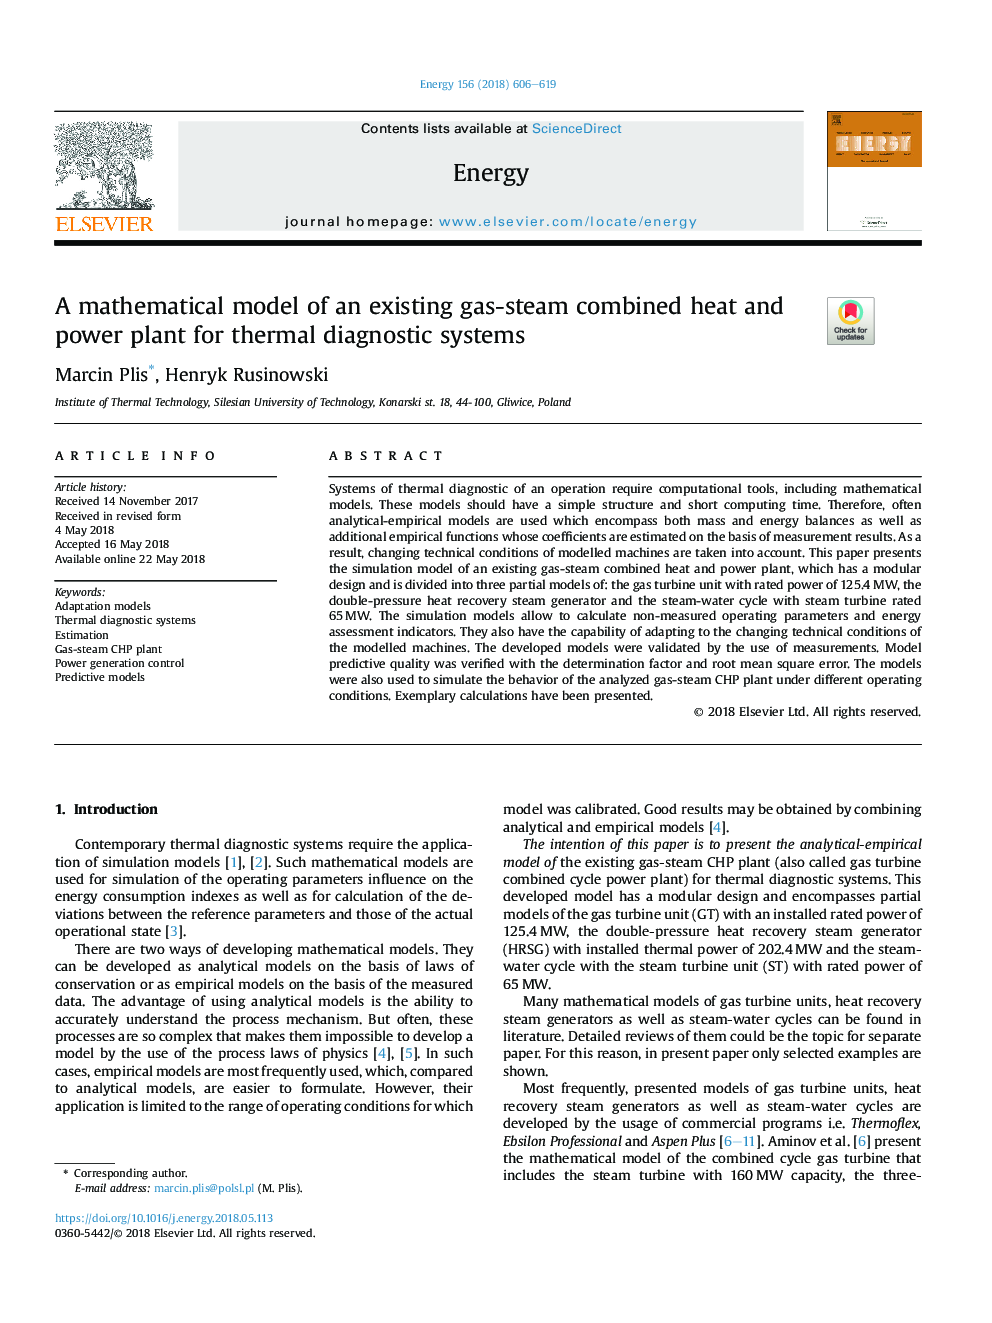 A mathematical model of an existing gas-steam combined heat and power plant for thermal diagnostic systems